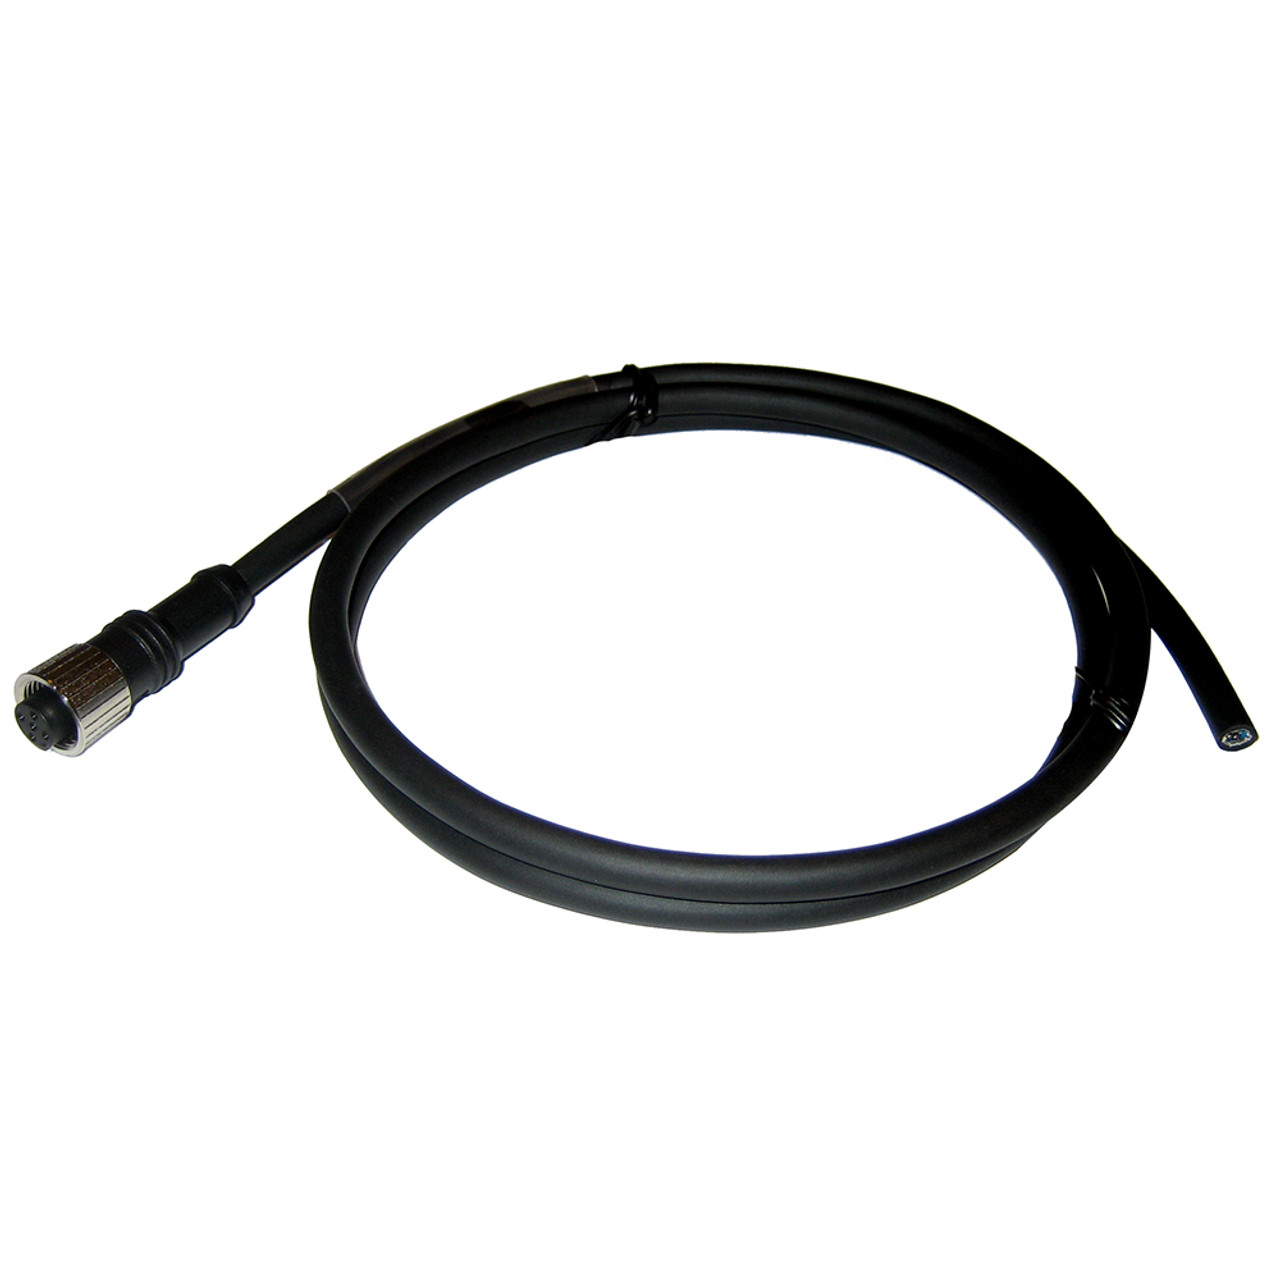 Furuno - NMEA2000 1M Micro Cable - Straight Female Connector & Pigtail - Apollo Lighting